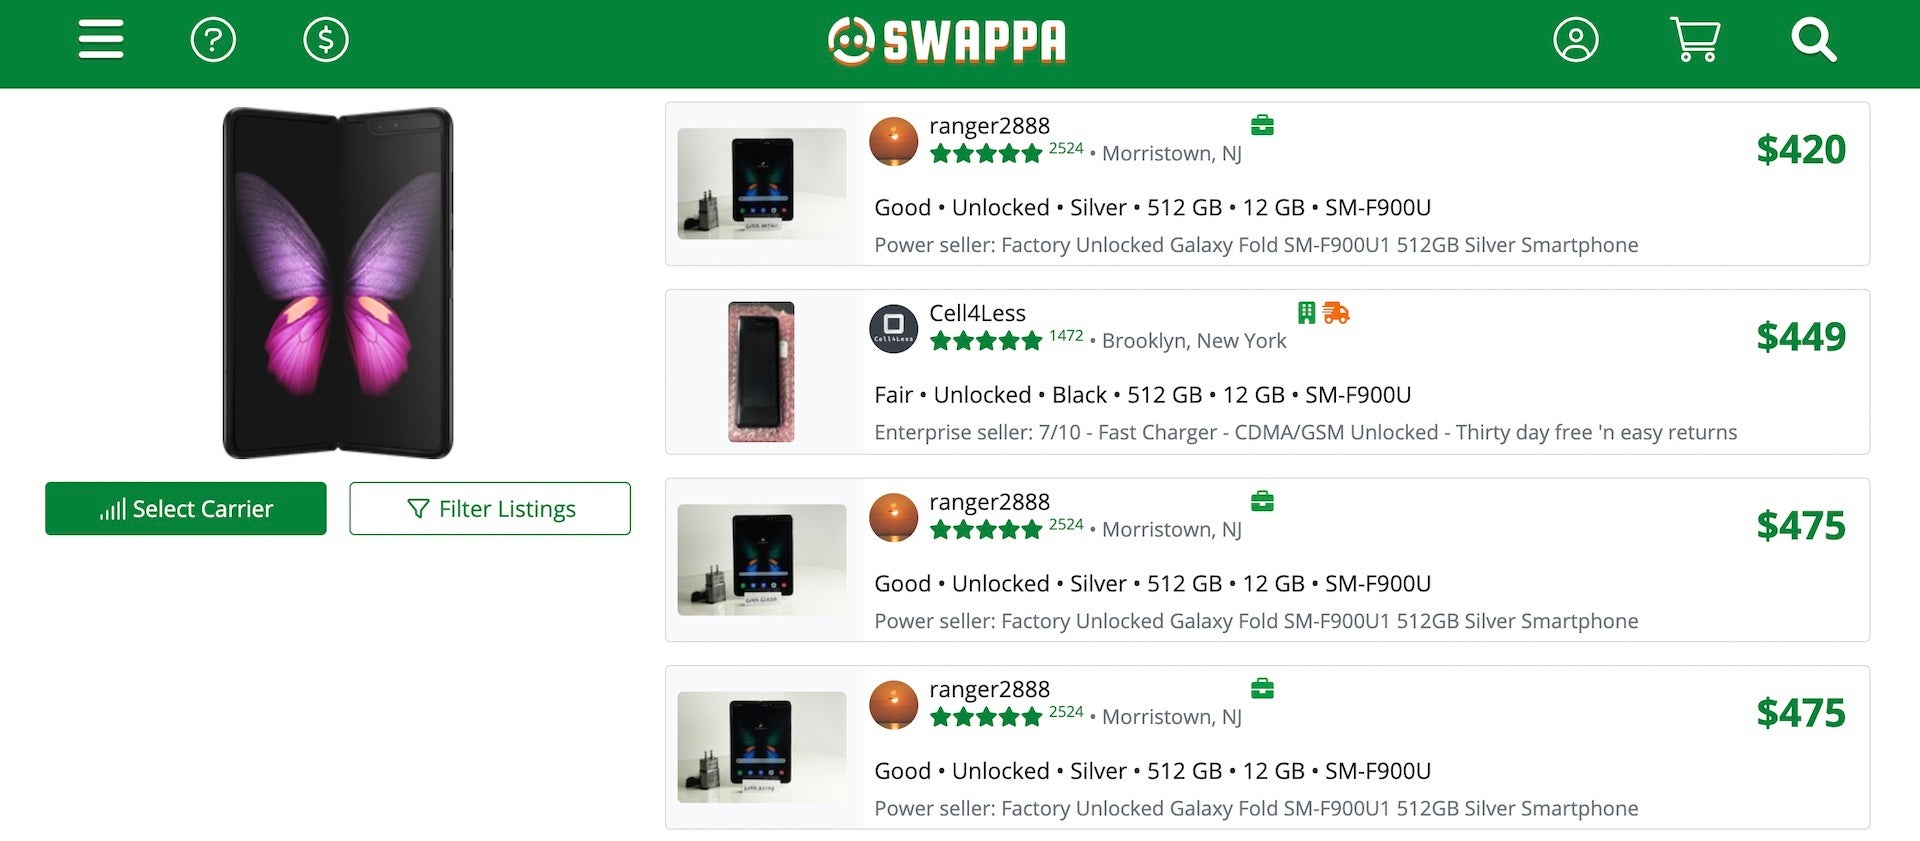 Galaxy Fold prices on Swappa are a fraction of the original retail price - Buying a foldable phone is a terrible investment right now